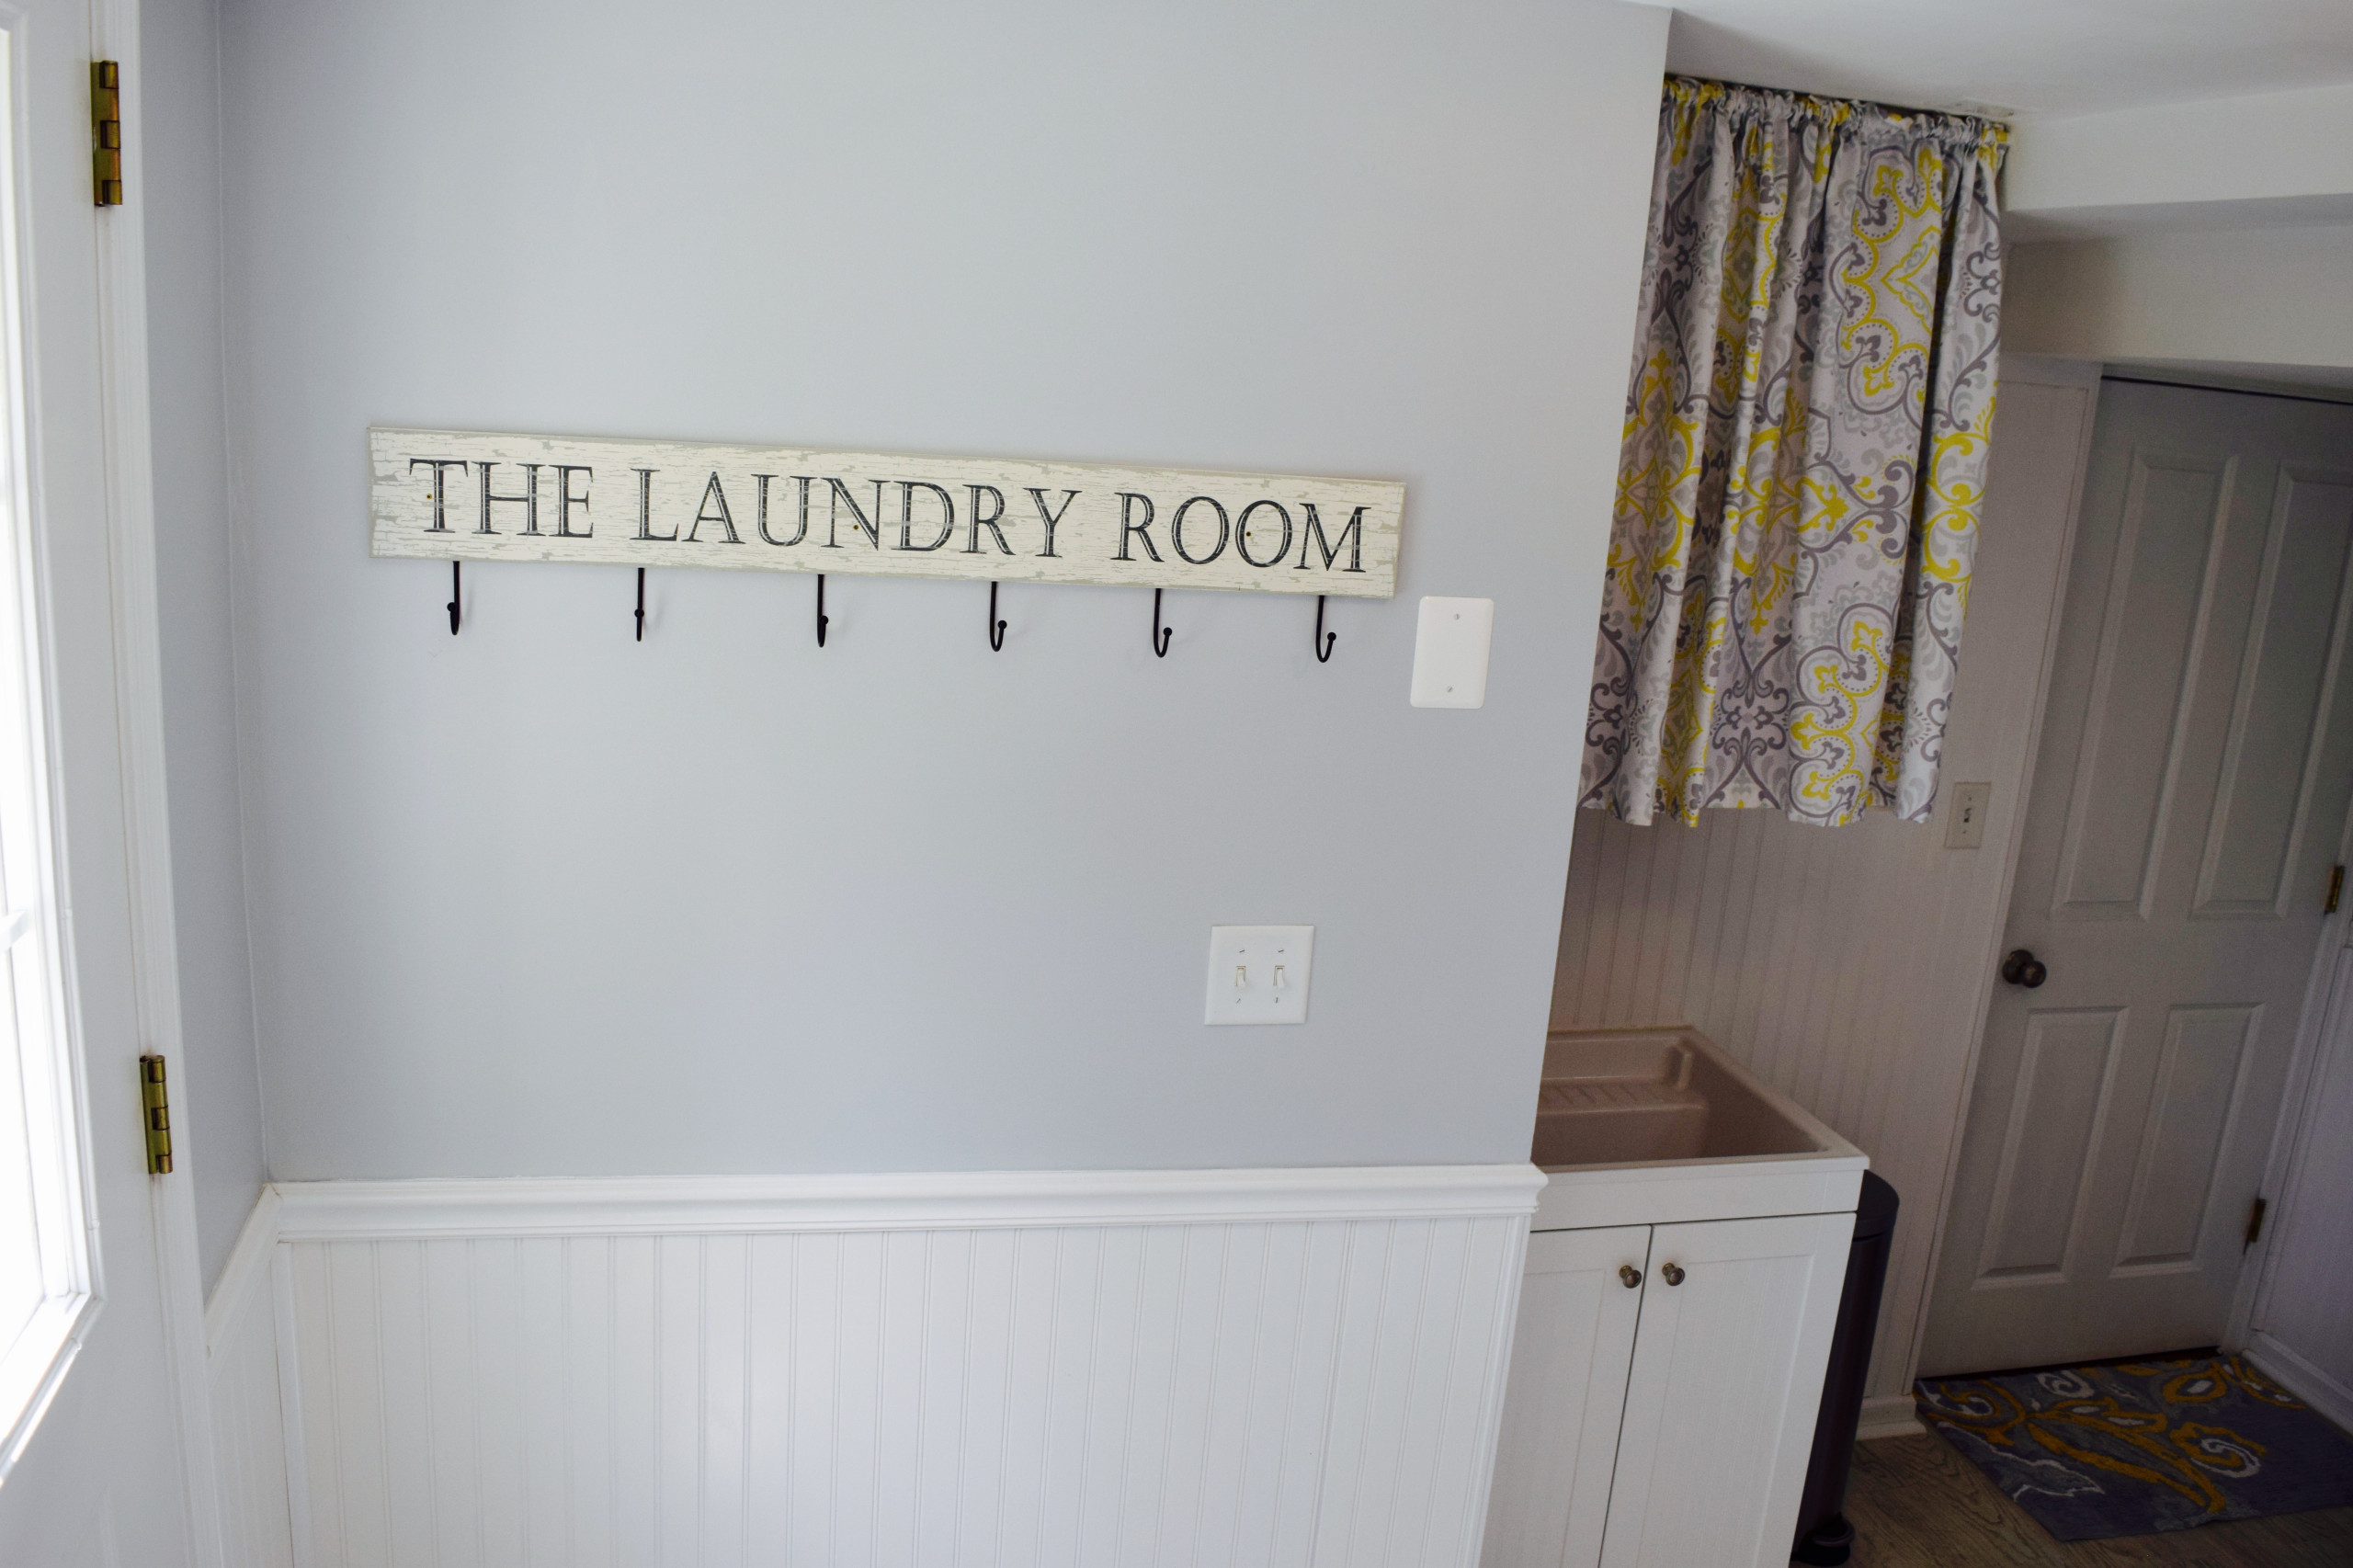 The Laundry Room